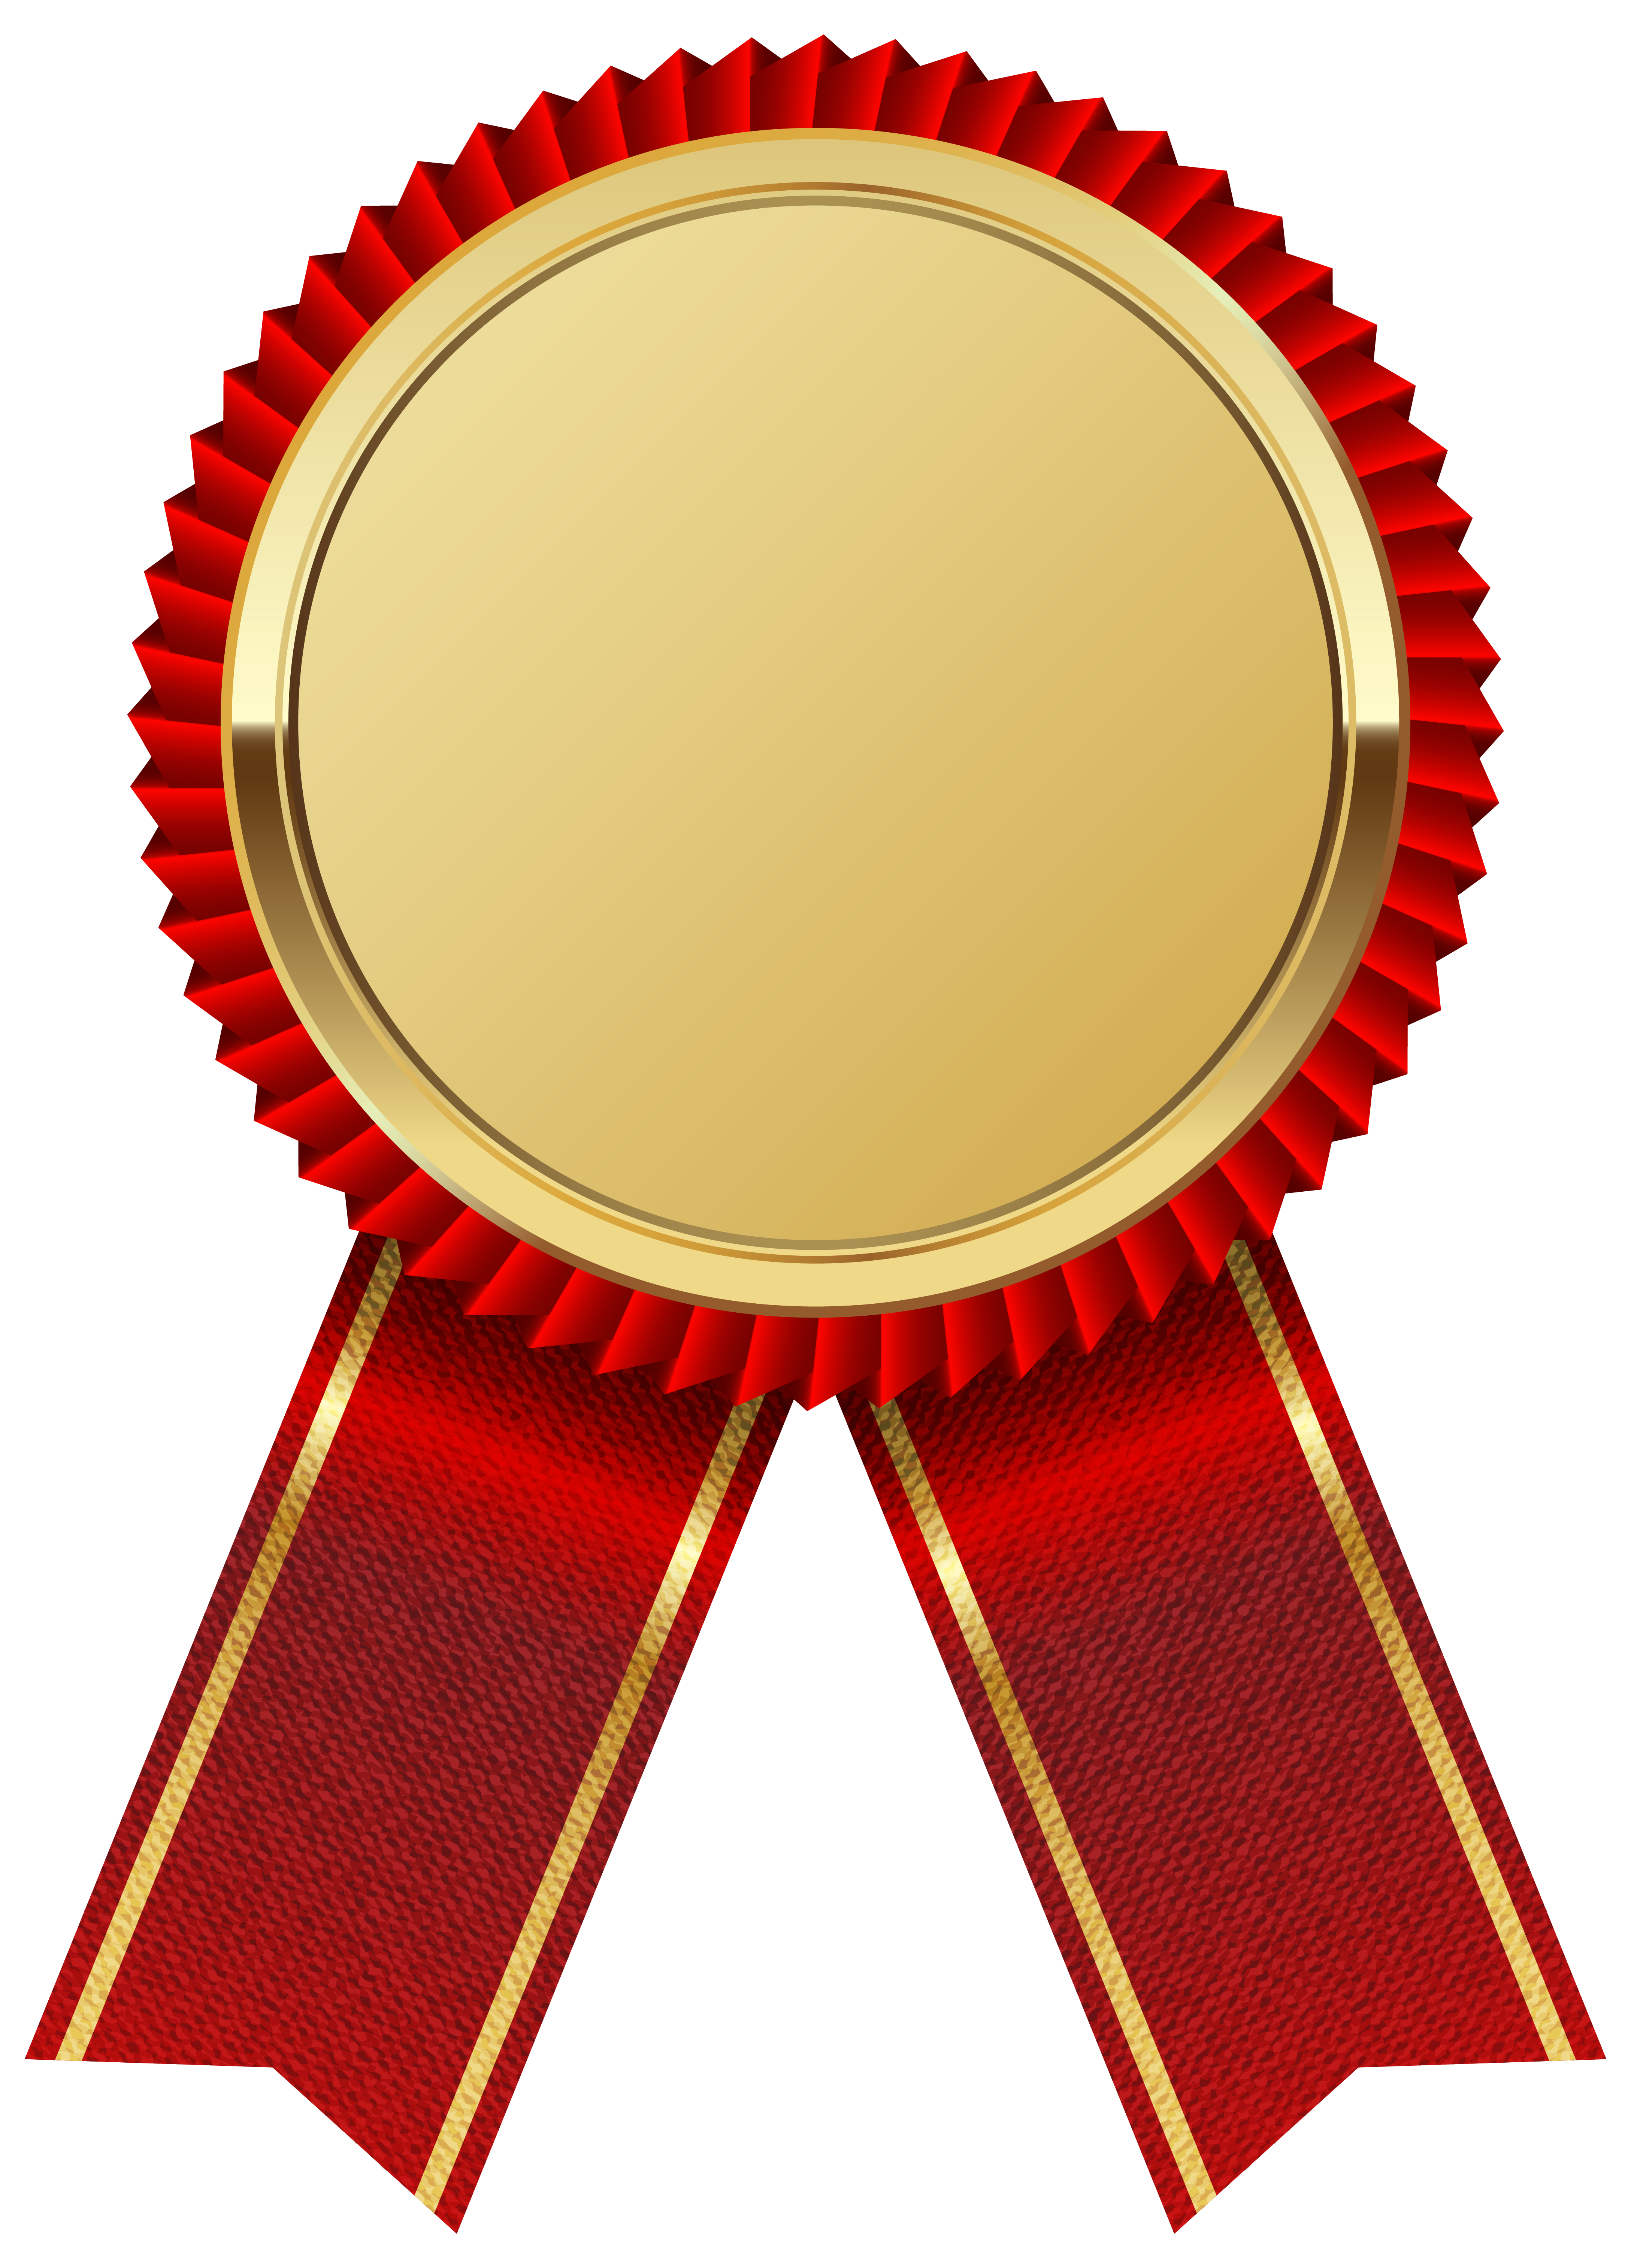 With Medal Gold Ribbon Red PNG Image High Quality Clipart